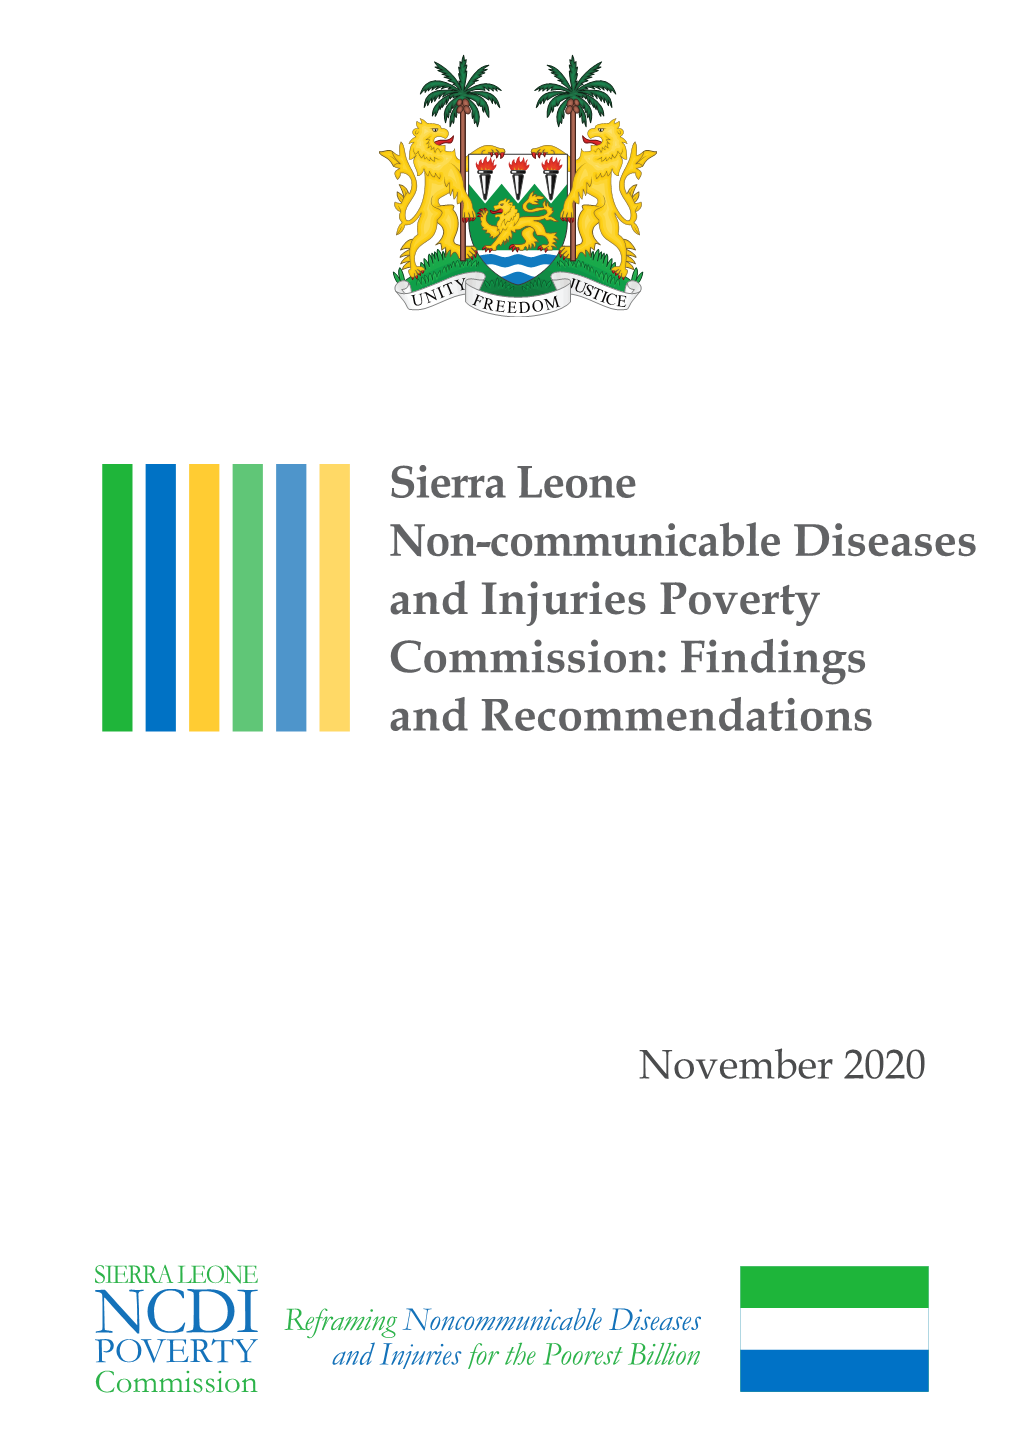 Sierra Leone Non-Communicable Diseases and Injuries Poverty Commission: Findings and Recommendations